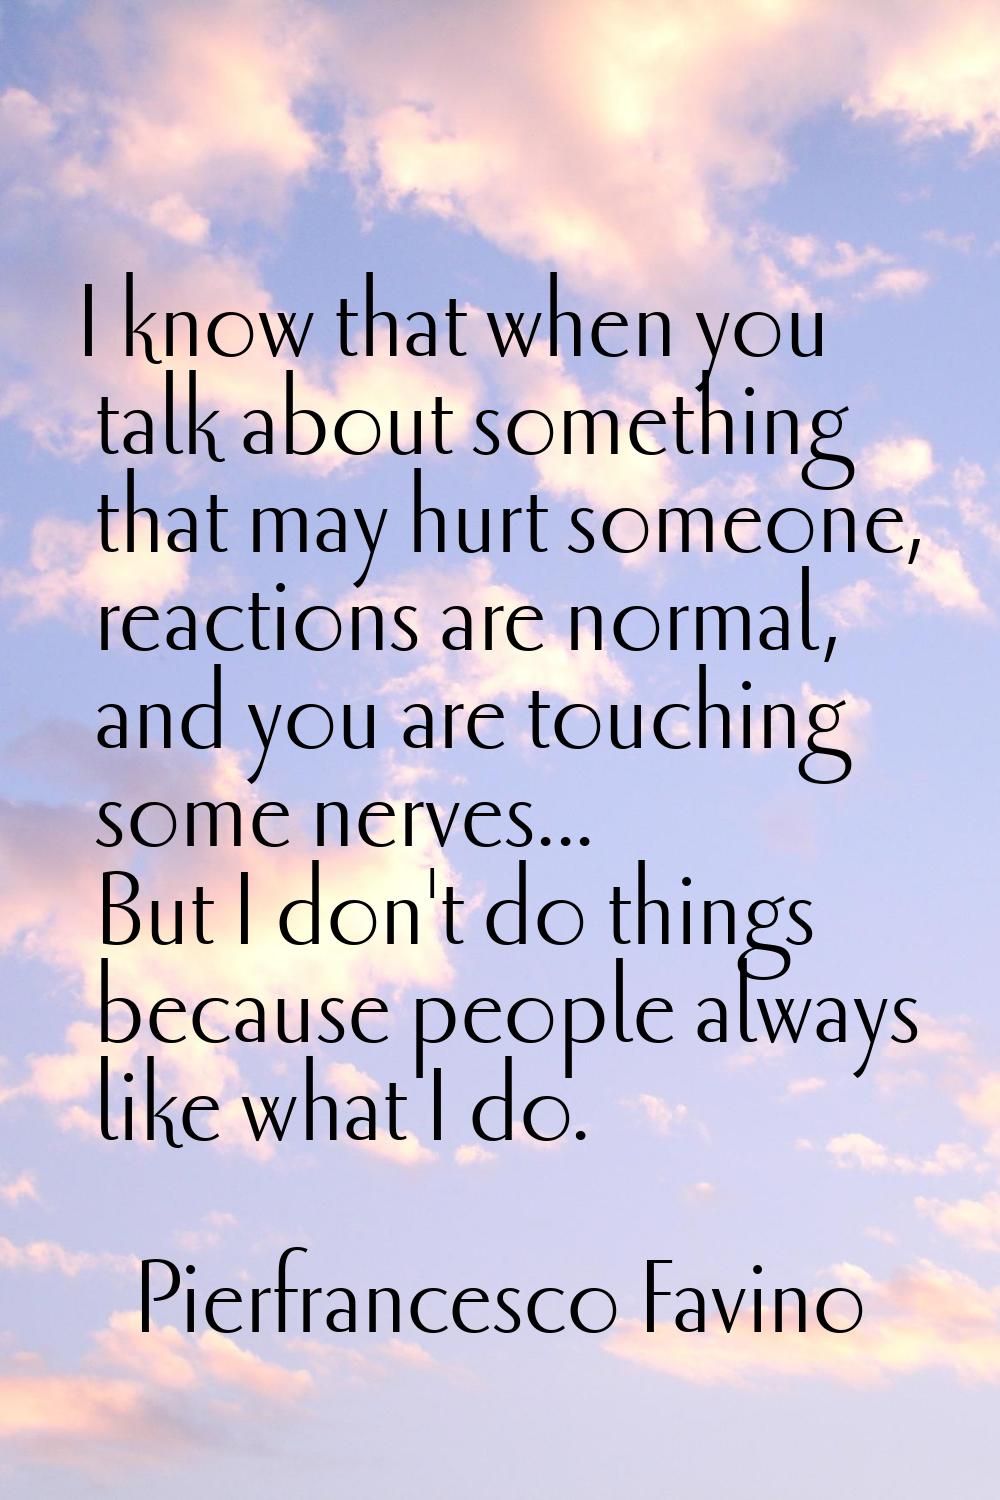 I know that when you talk about something that may hurt someone, reactions are normal, and you are 